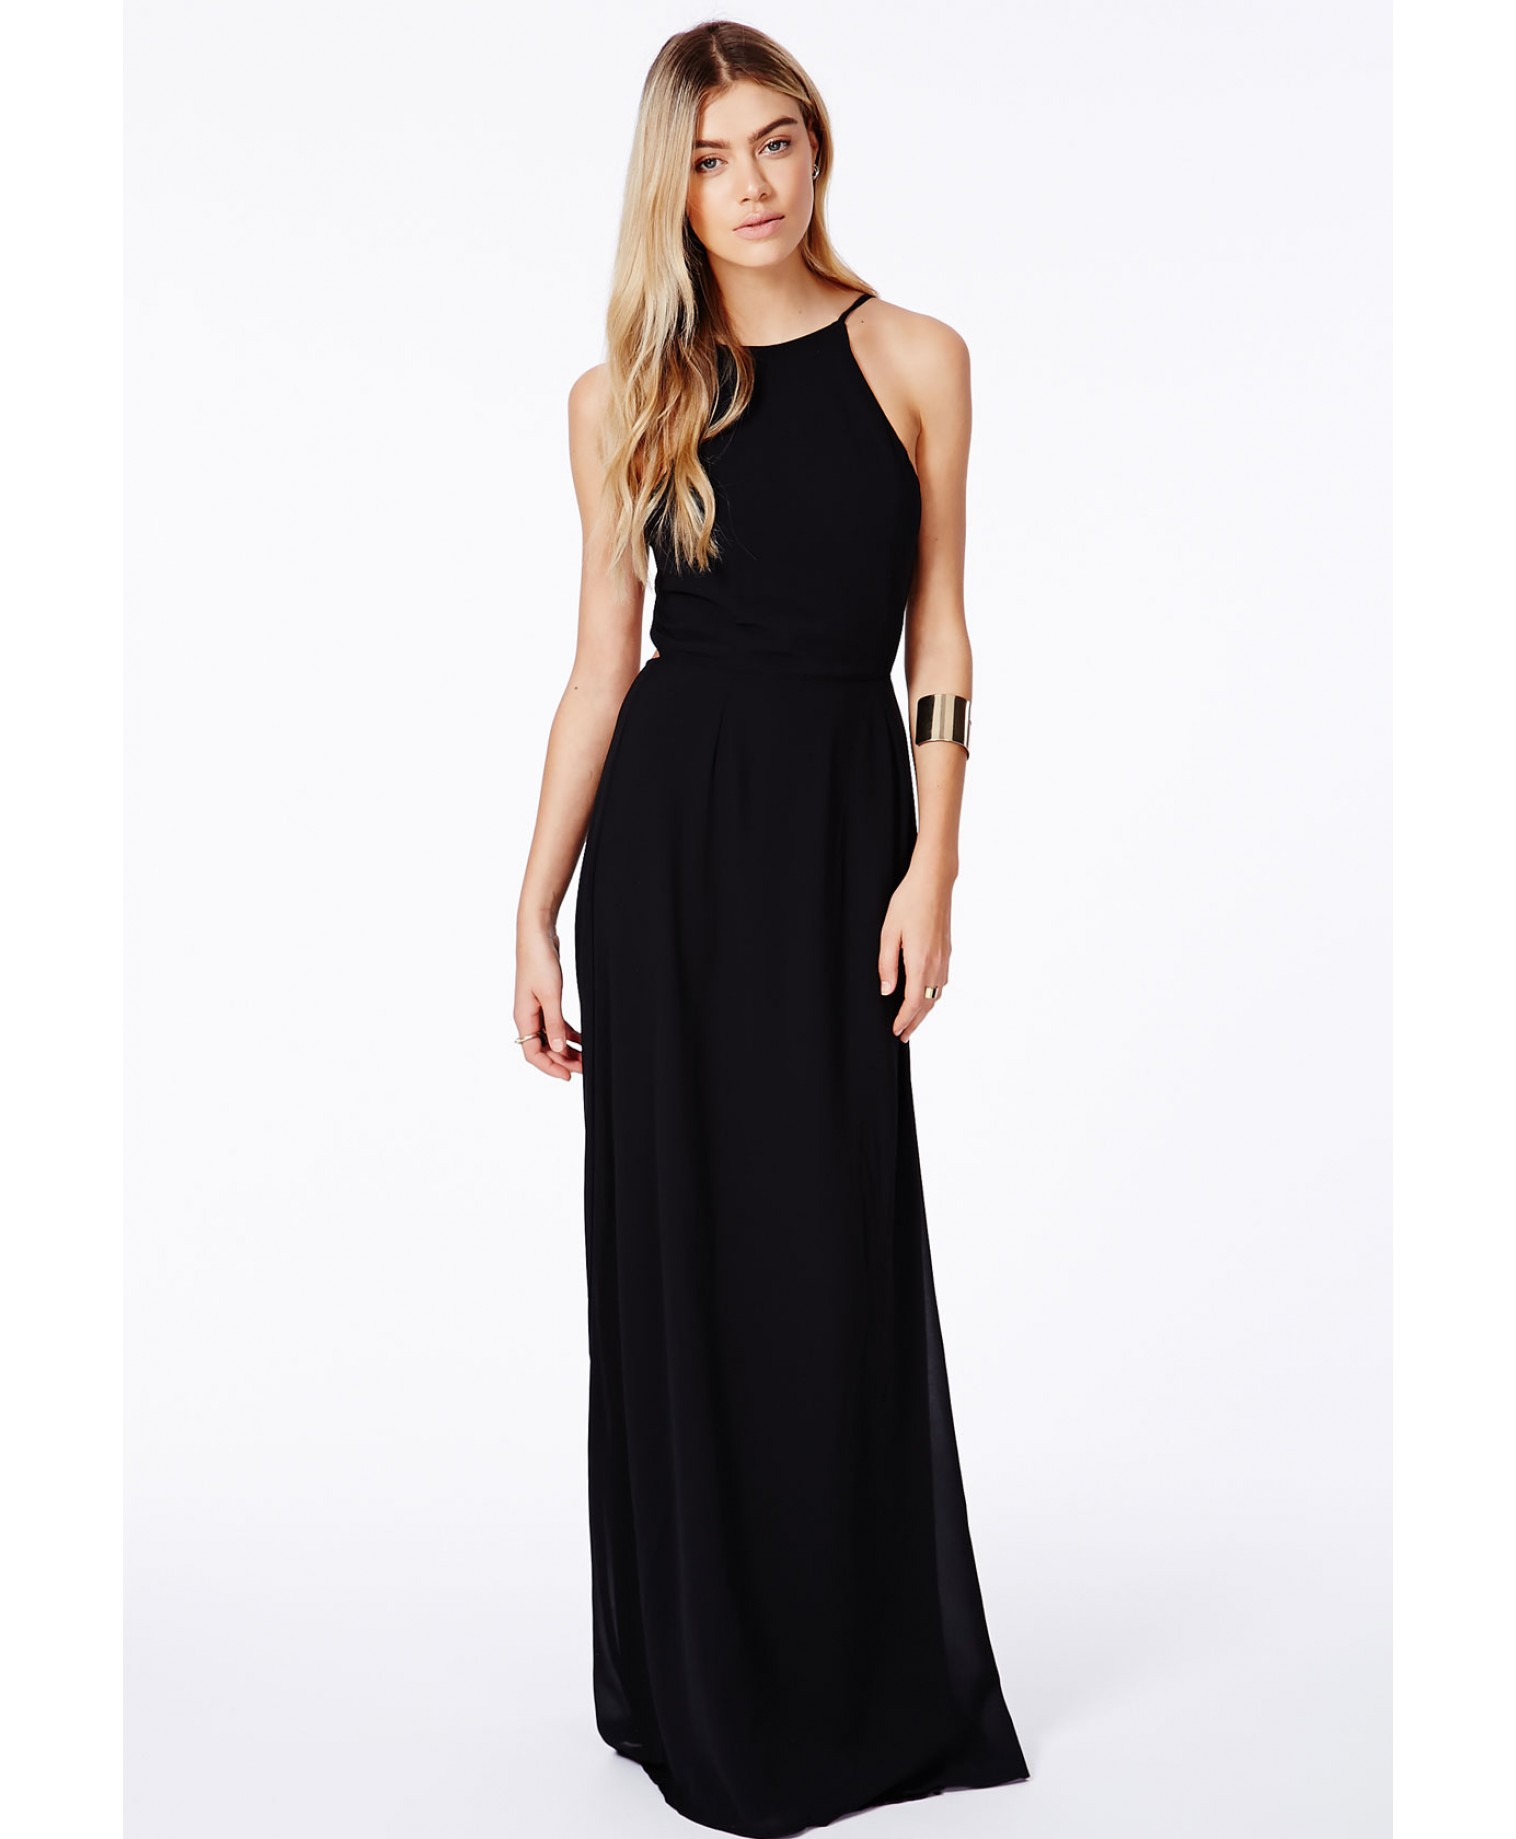 Lyst - Missguided Strappy Open Back Maxi Dress Black in Black